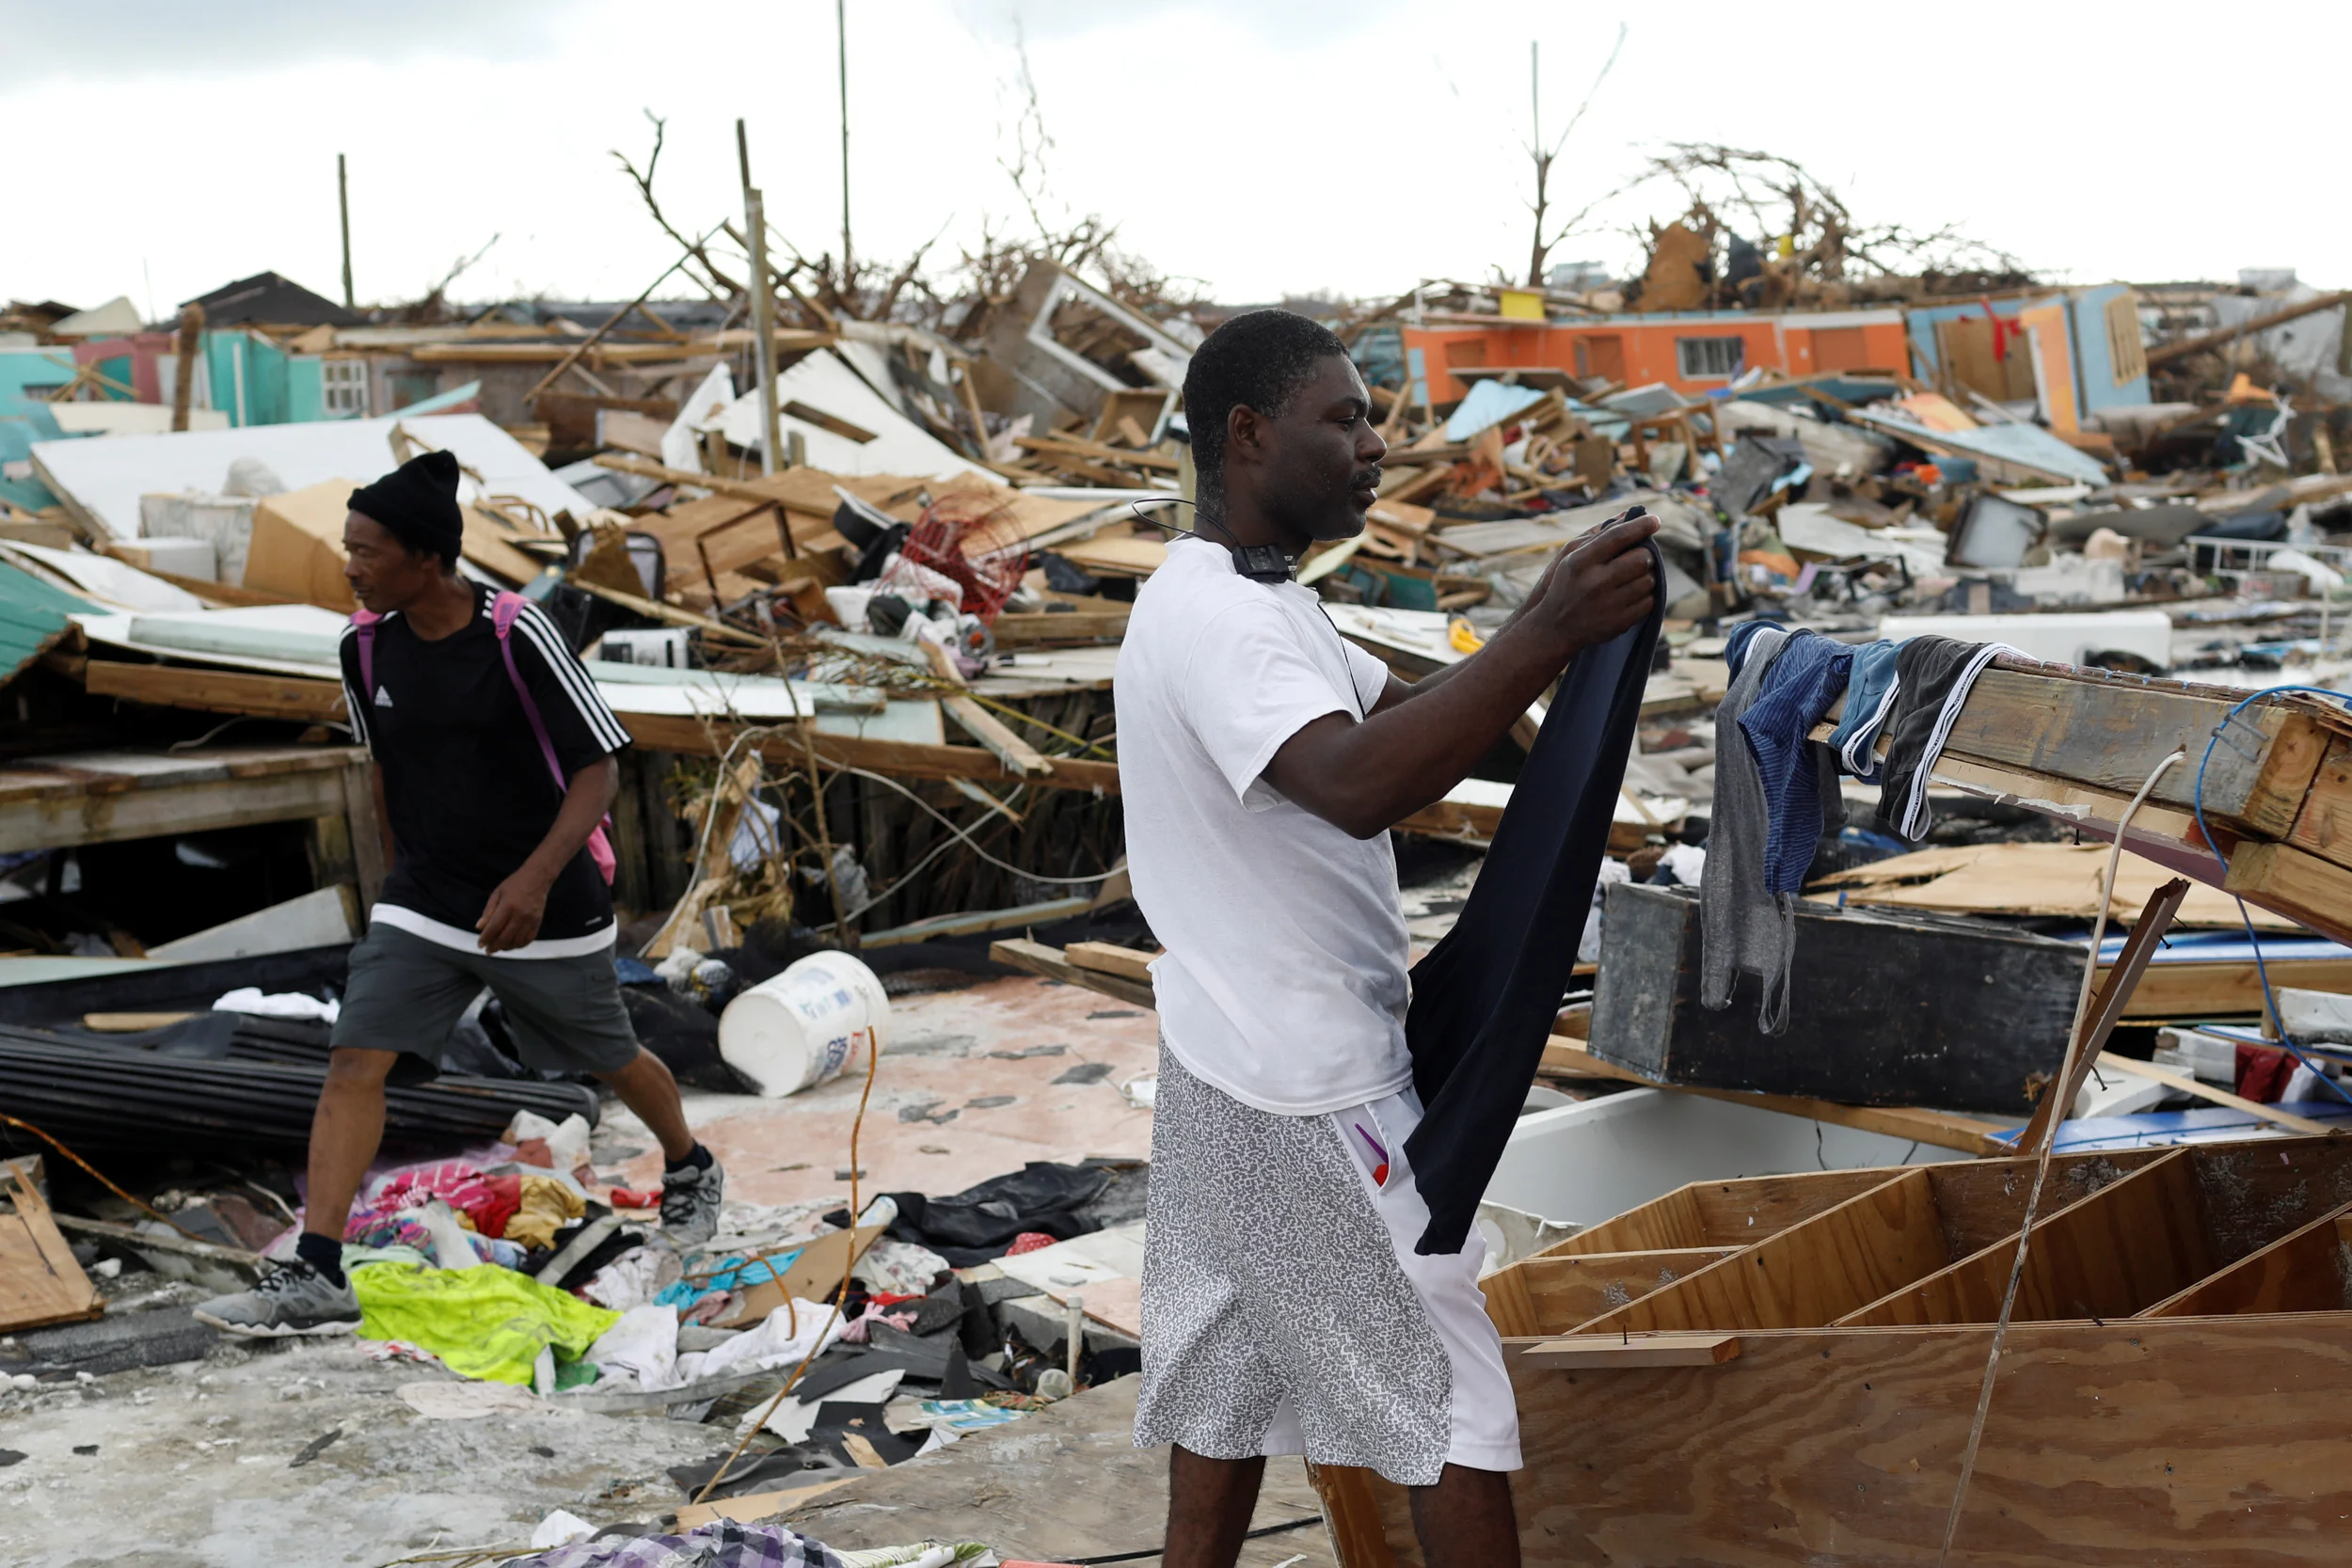 A Man Hangs His Clothes After Washing Them At The Mudd Neighborhood, Devastated After Hurricane Dorian Hit The Abaco Islands In Marsh Harbour